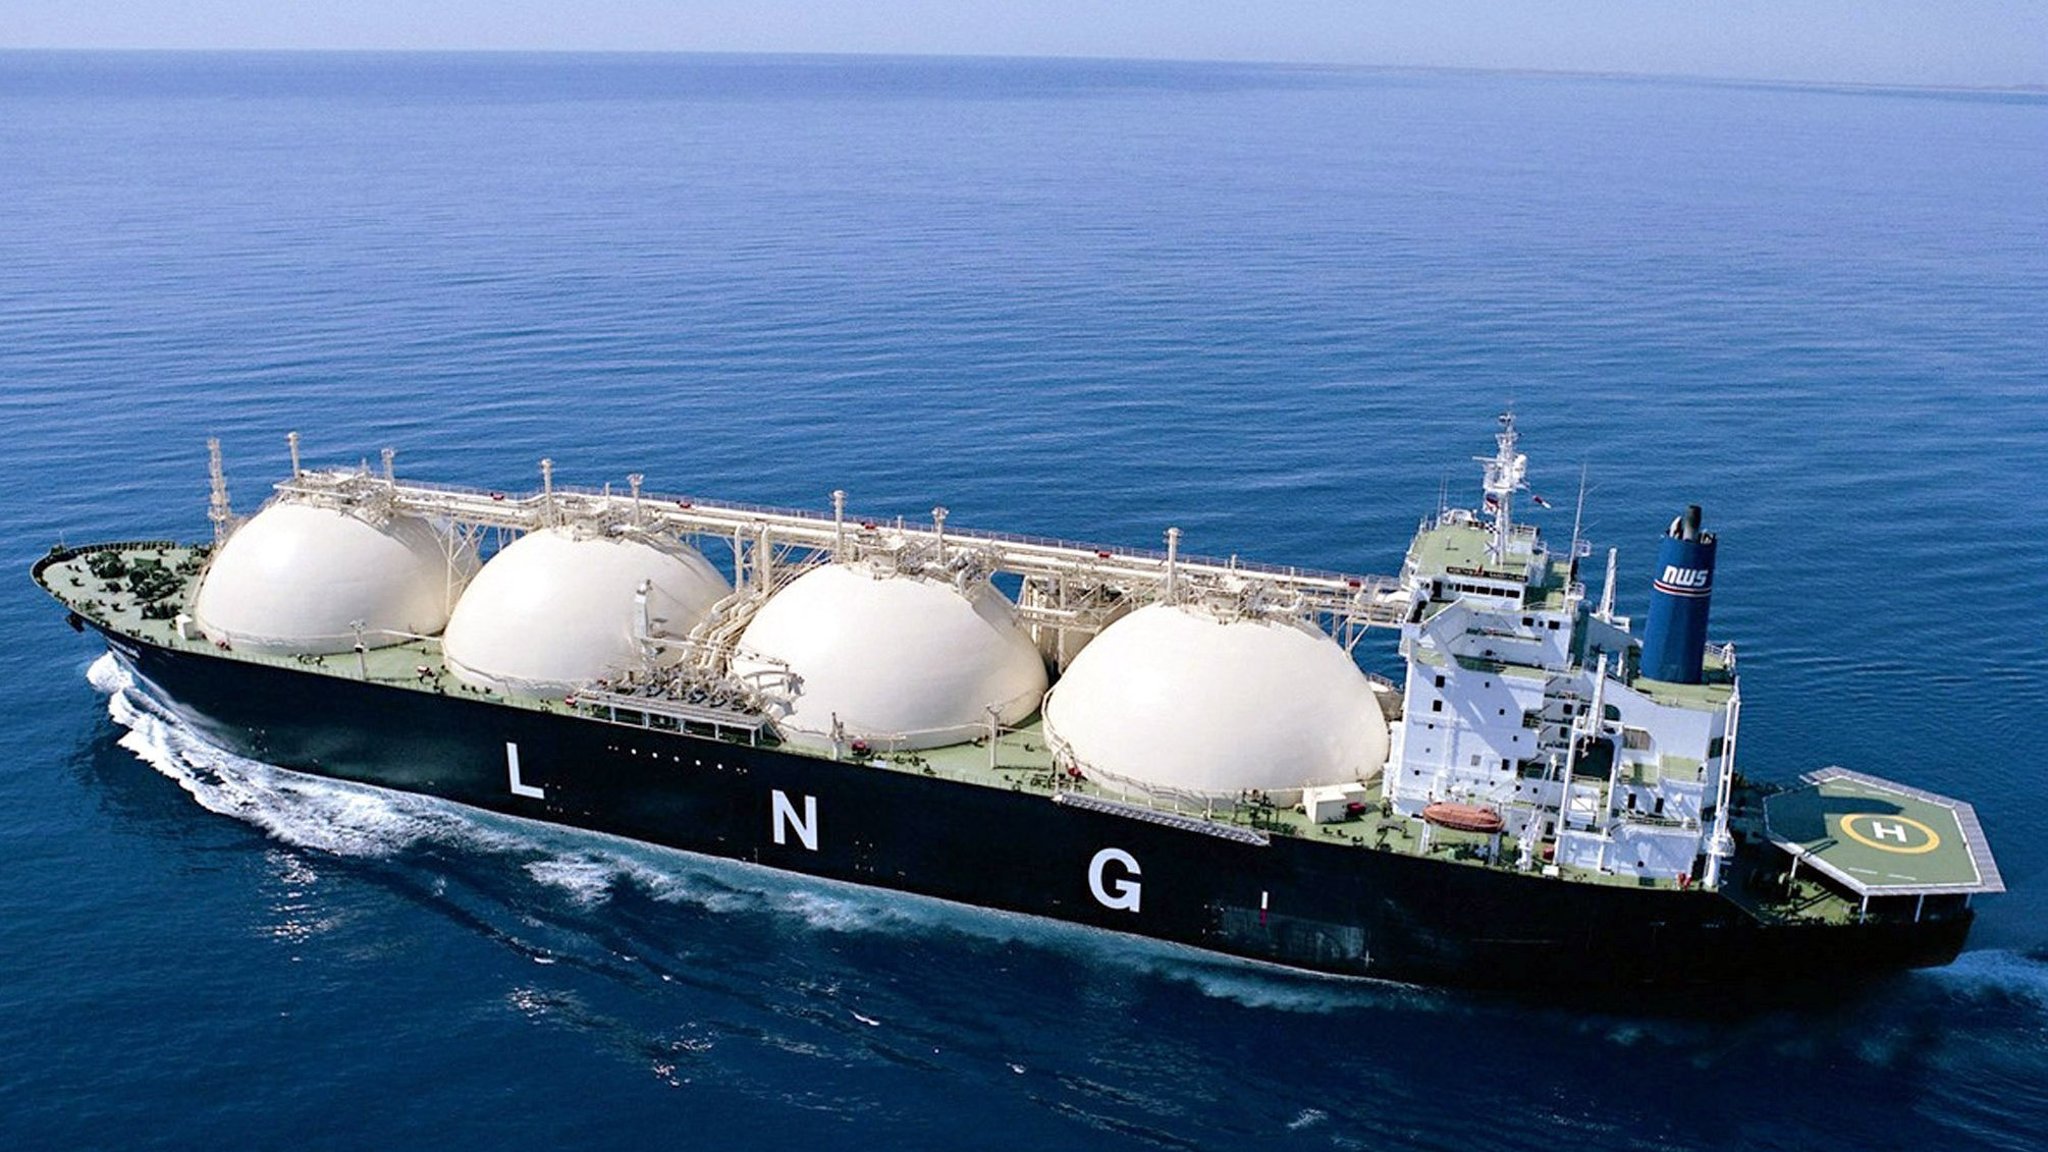 Surging Australian LNG exports: A growing global presence